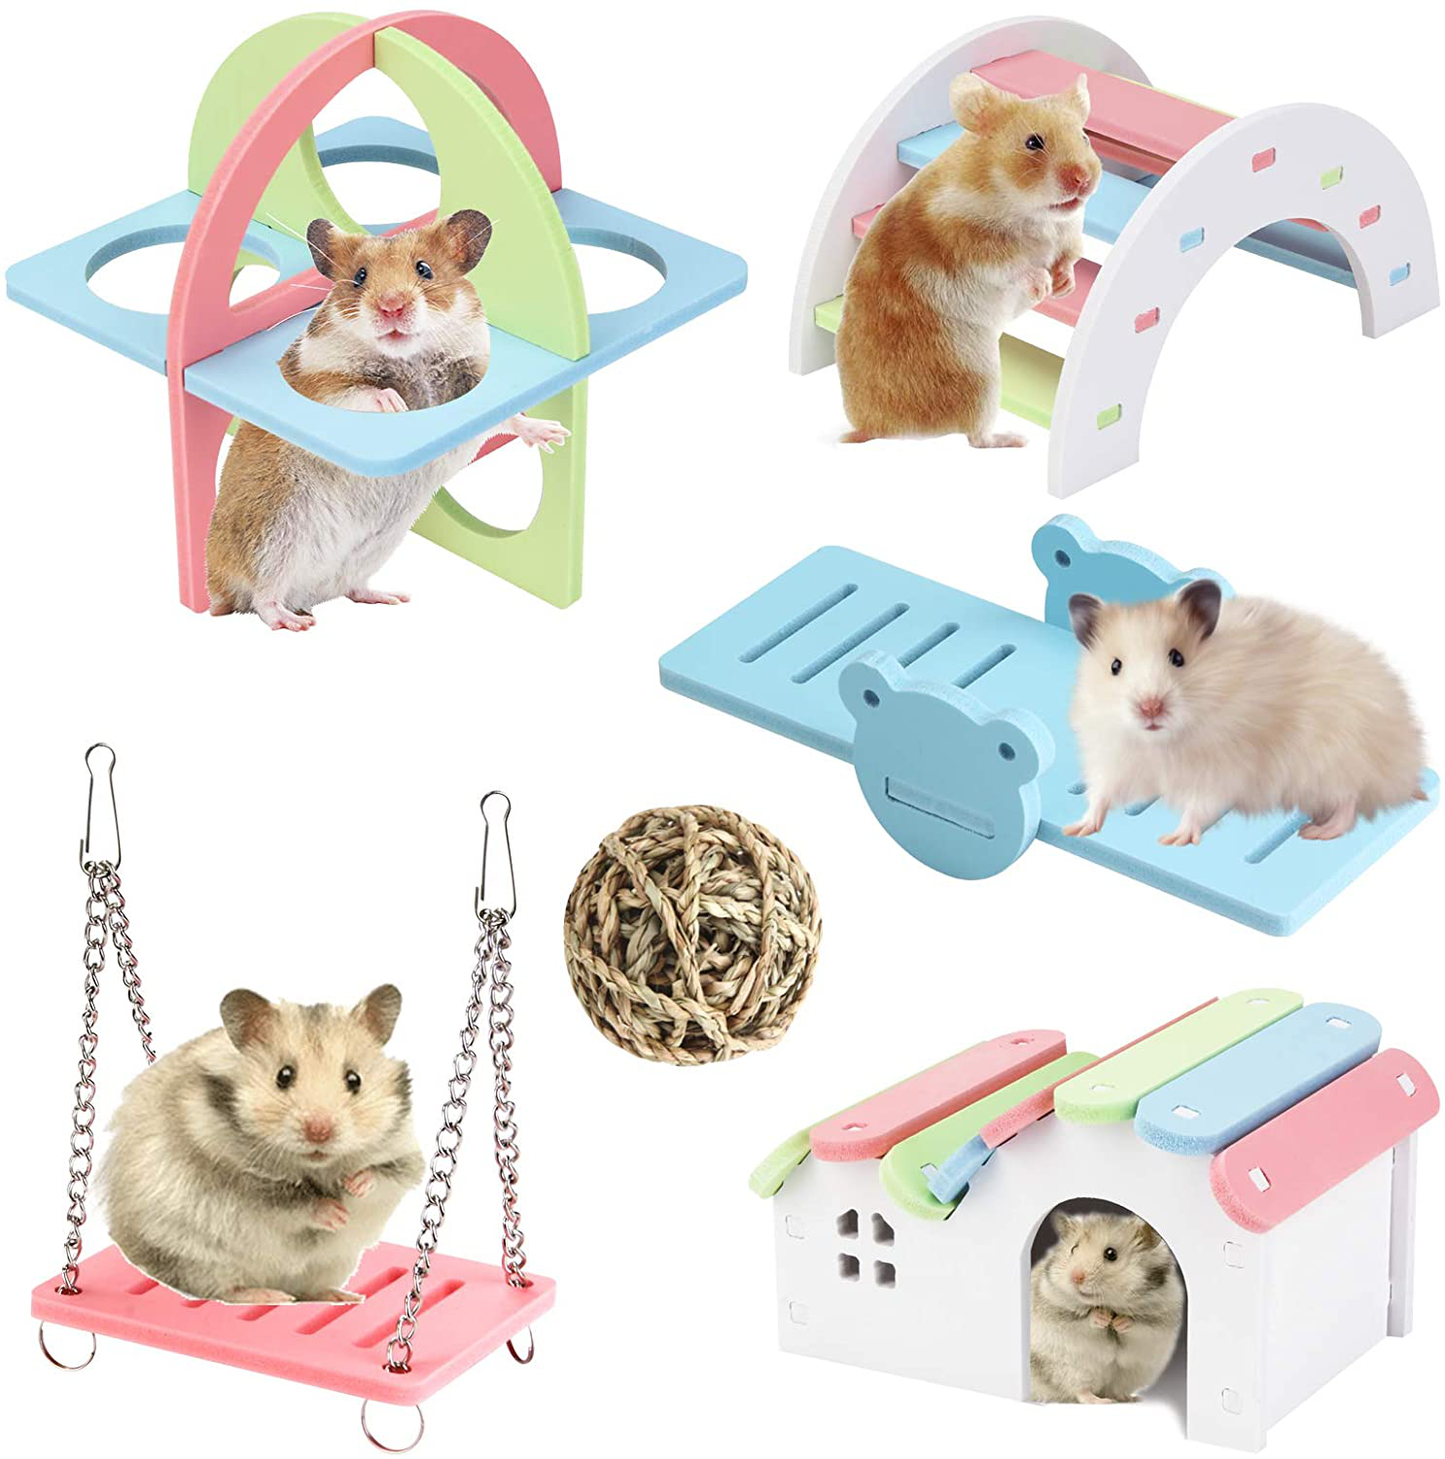 Lenpestia 6 Pieces Pet Sports Toys Set, Dwarf Hamsters House, Gerbil Hideout Rainbow Bridge, Seagrass Ball, Swing and Seesaw Syrian Hamster DIY Cage Accessories for Small Animal Habitat